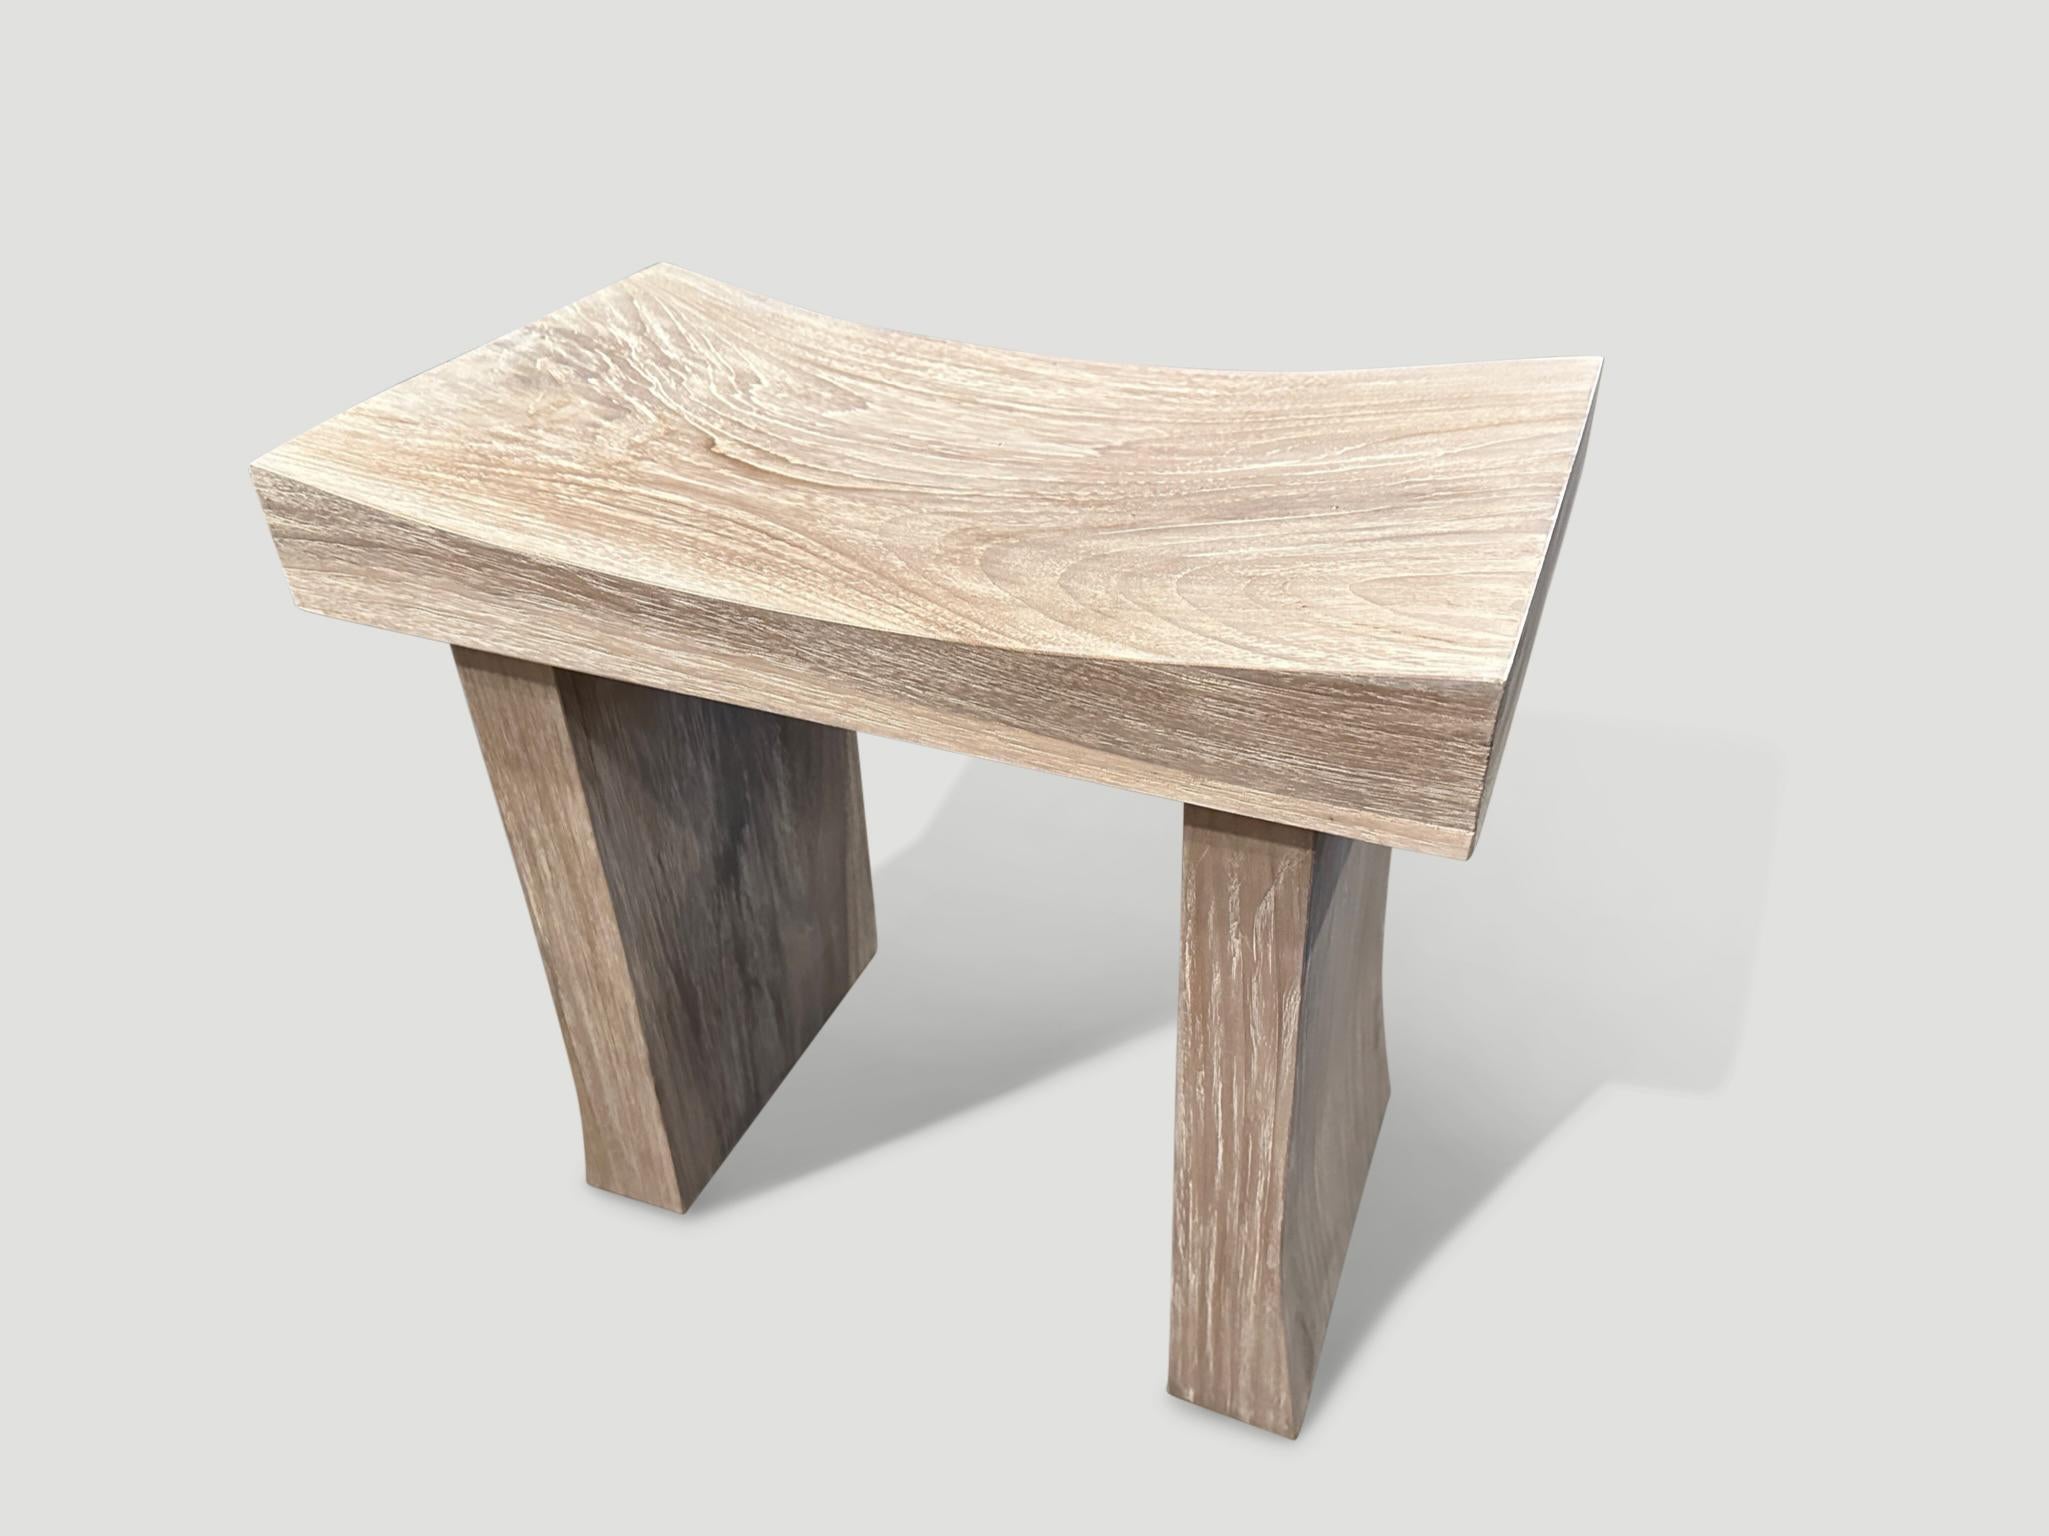 Sleek minimalist bench. Hand made from a two and a half  thick single slab of reclaimed teak and finished with a white wash, revealing the beautiful wood grain. Custom sizes and stains available. We just received a new collection in this style. All